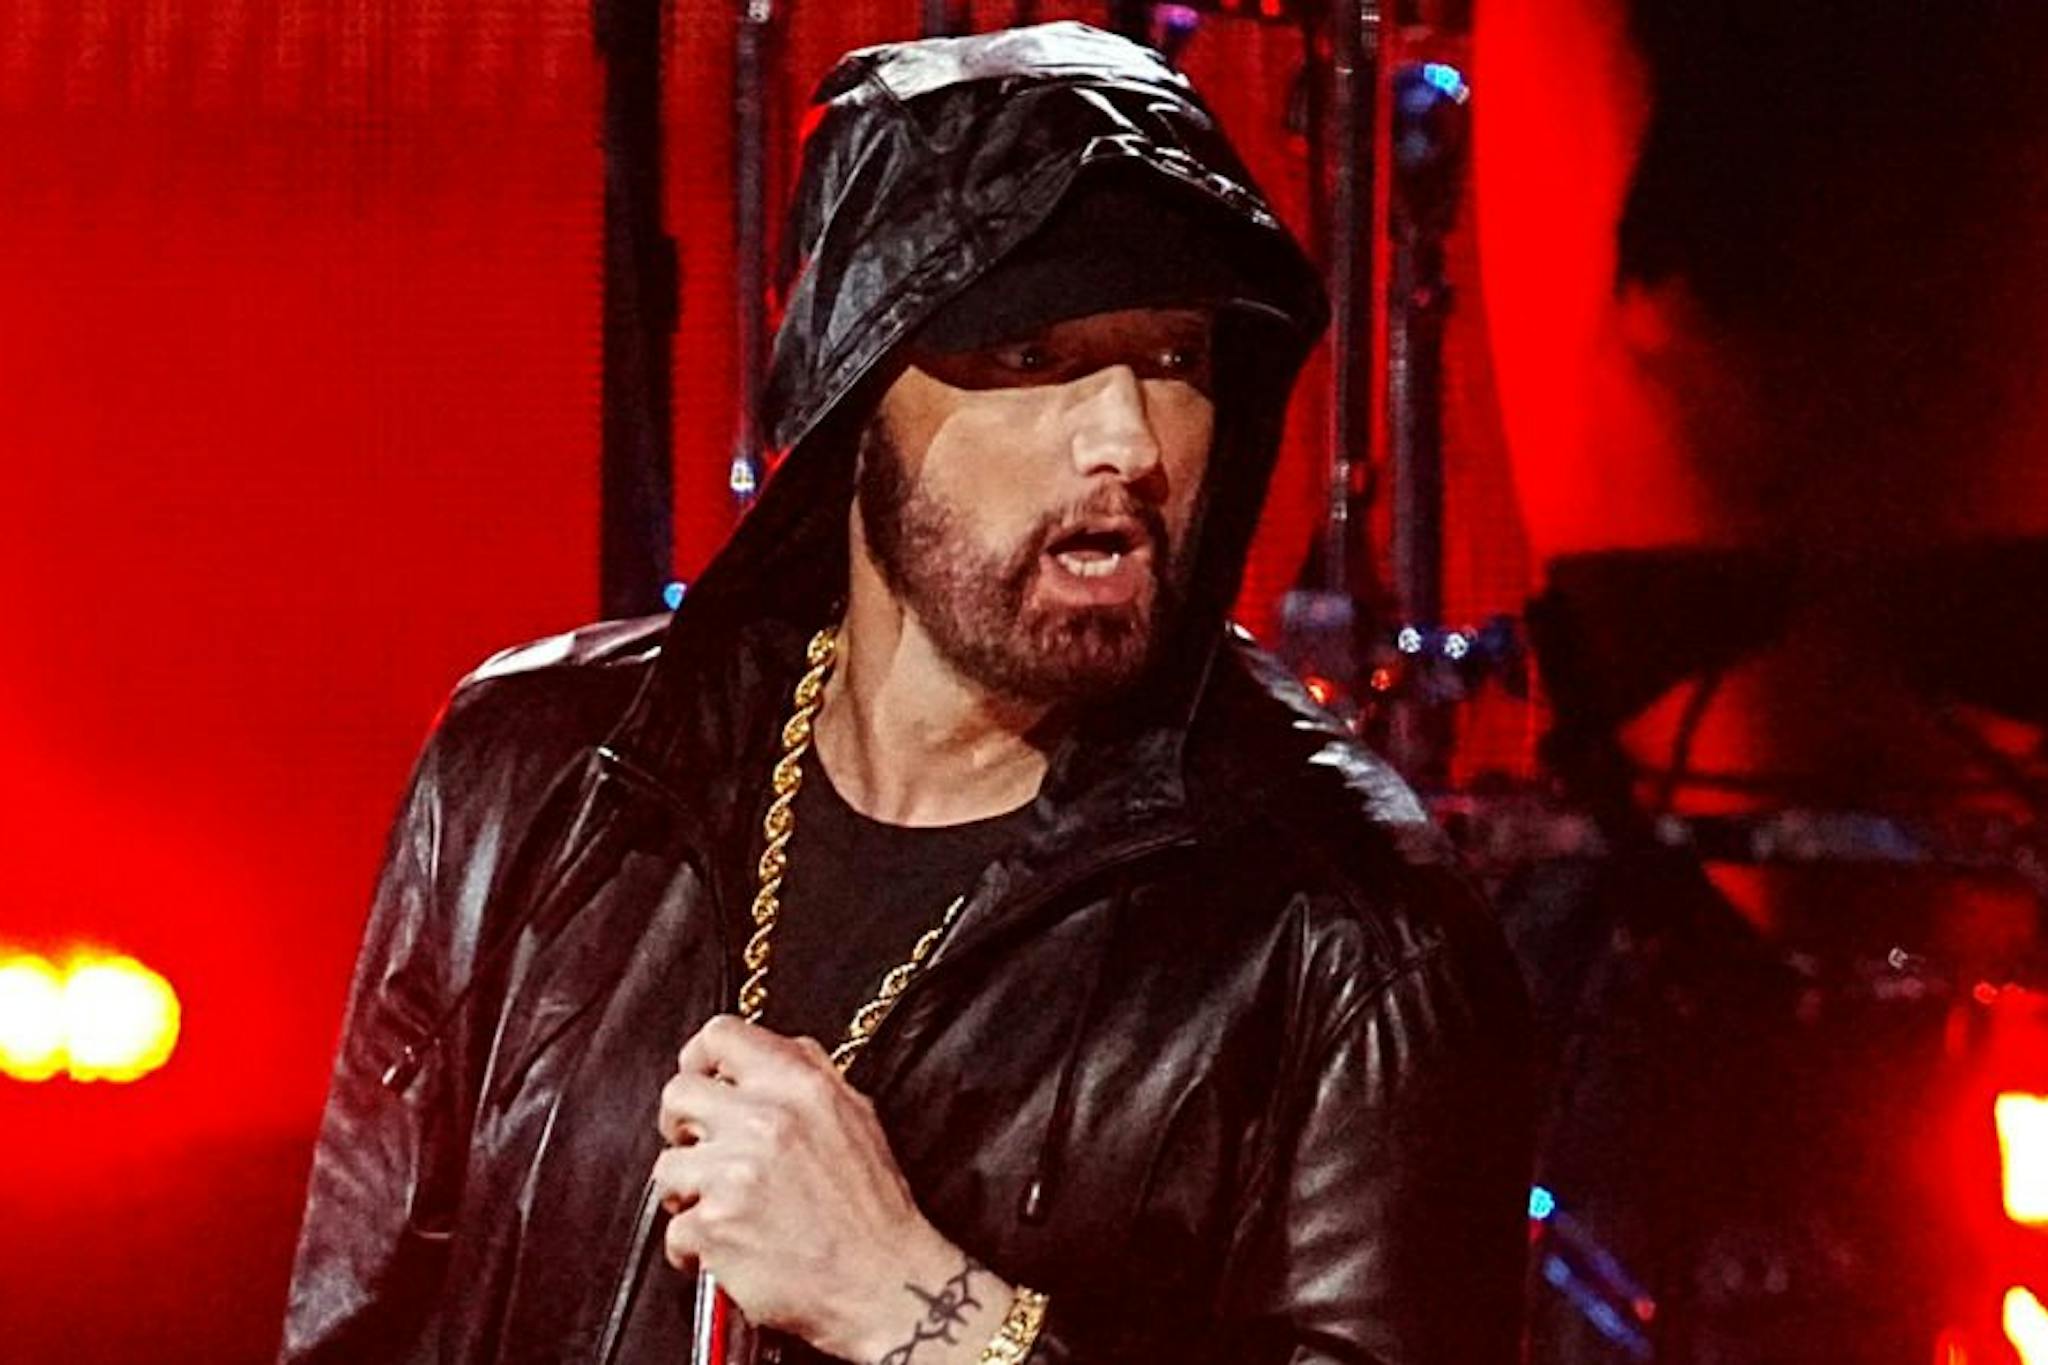 nductee Eminem performs on stage during the 37th Annual Rock & Roll Hall Of Fame Induction Ceremony at Microsoft Theater on November 05, 2022 in Los Angeles, California. 